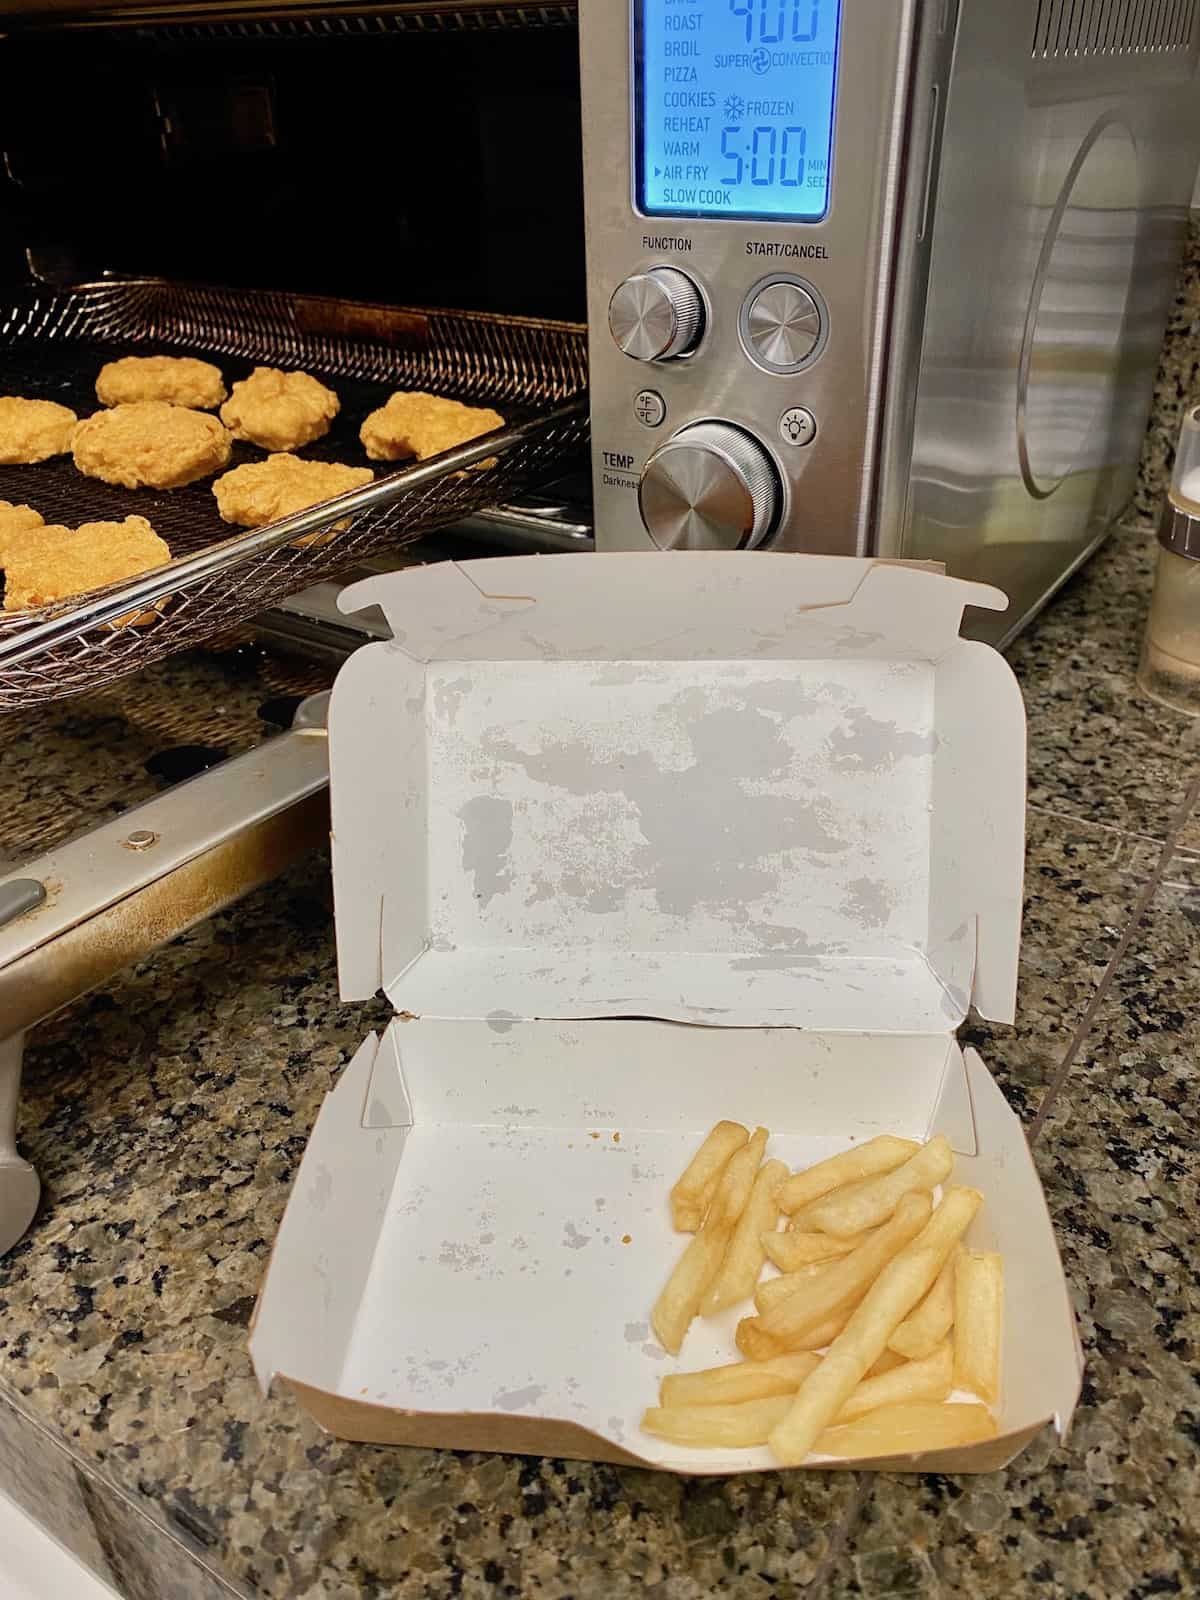 Open box with fries in it and nuggets on air fryer tray.